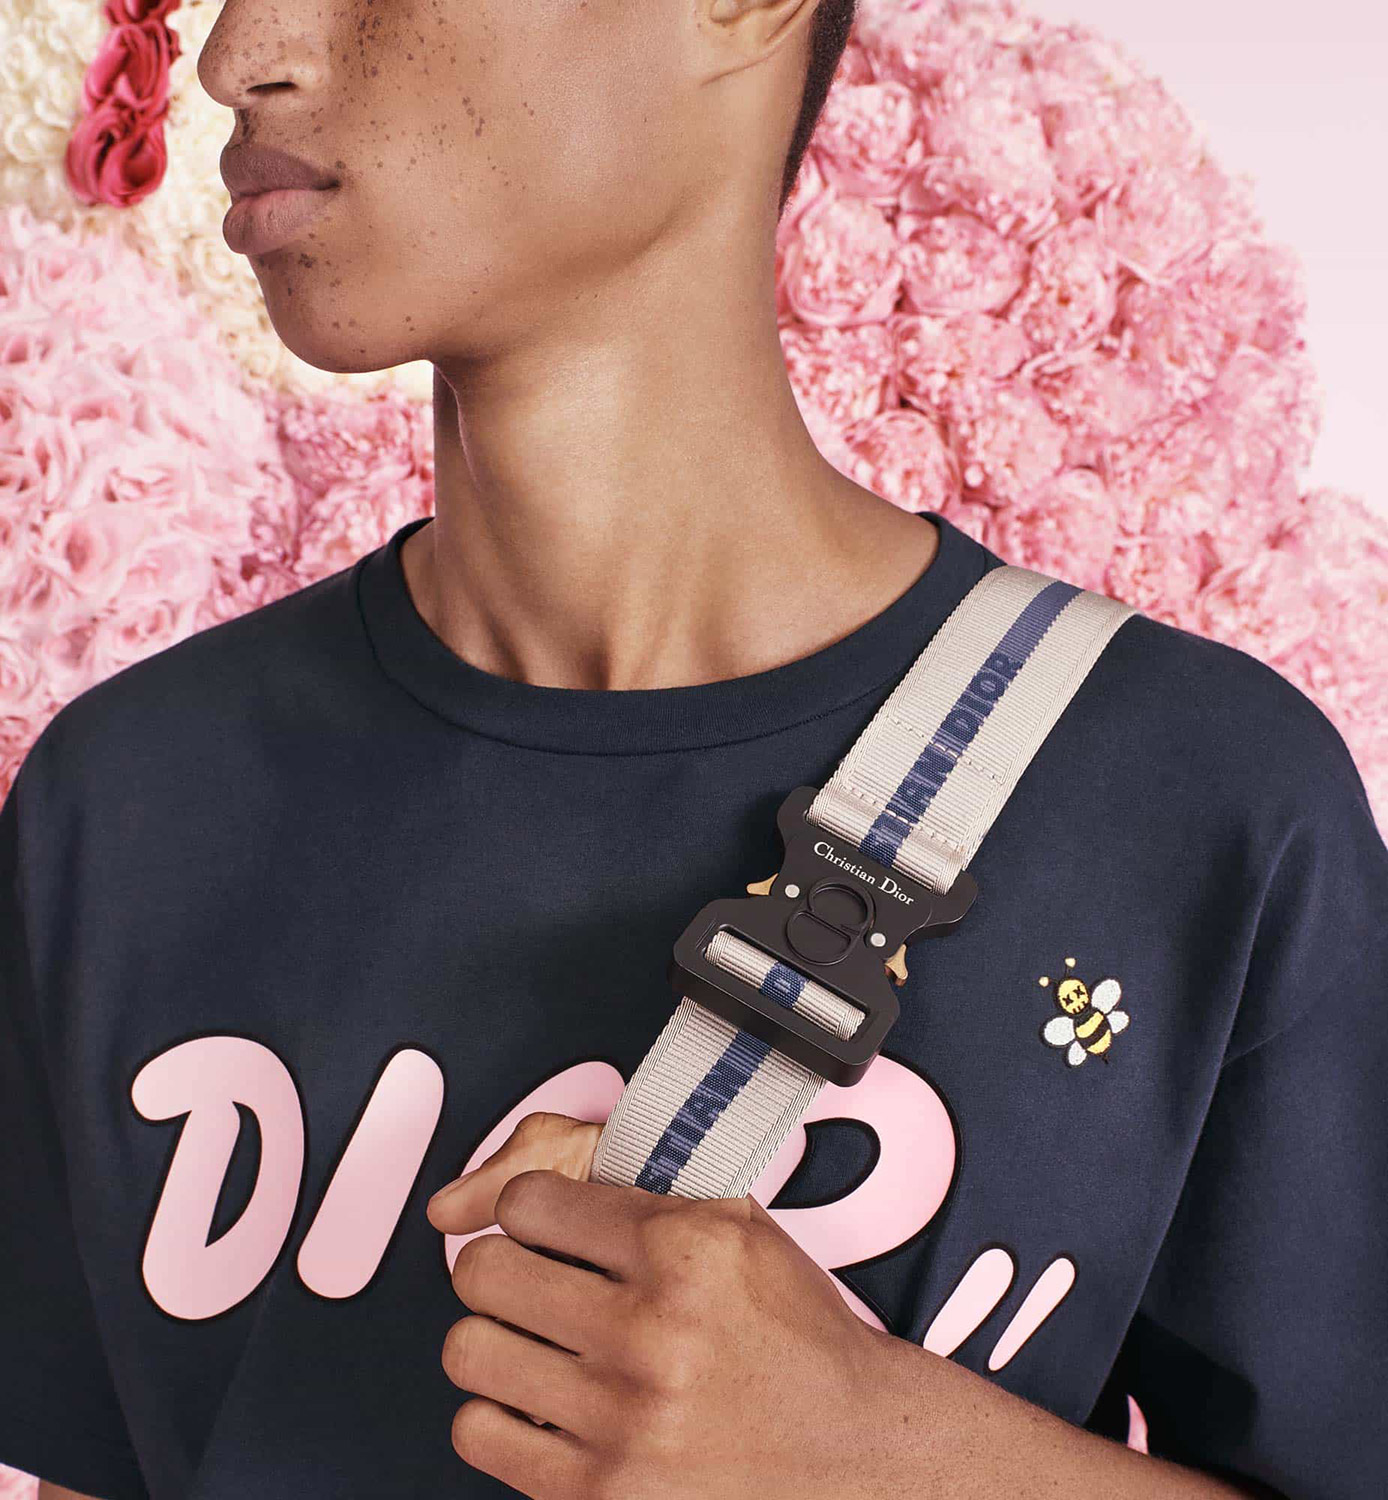 Dior x KAWS SS19 Collection: Release Date, Price & More Info